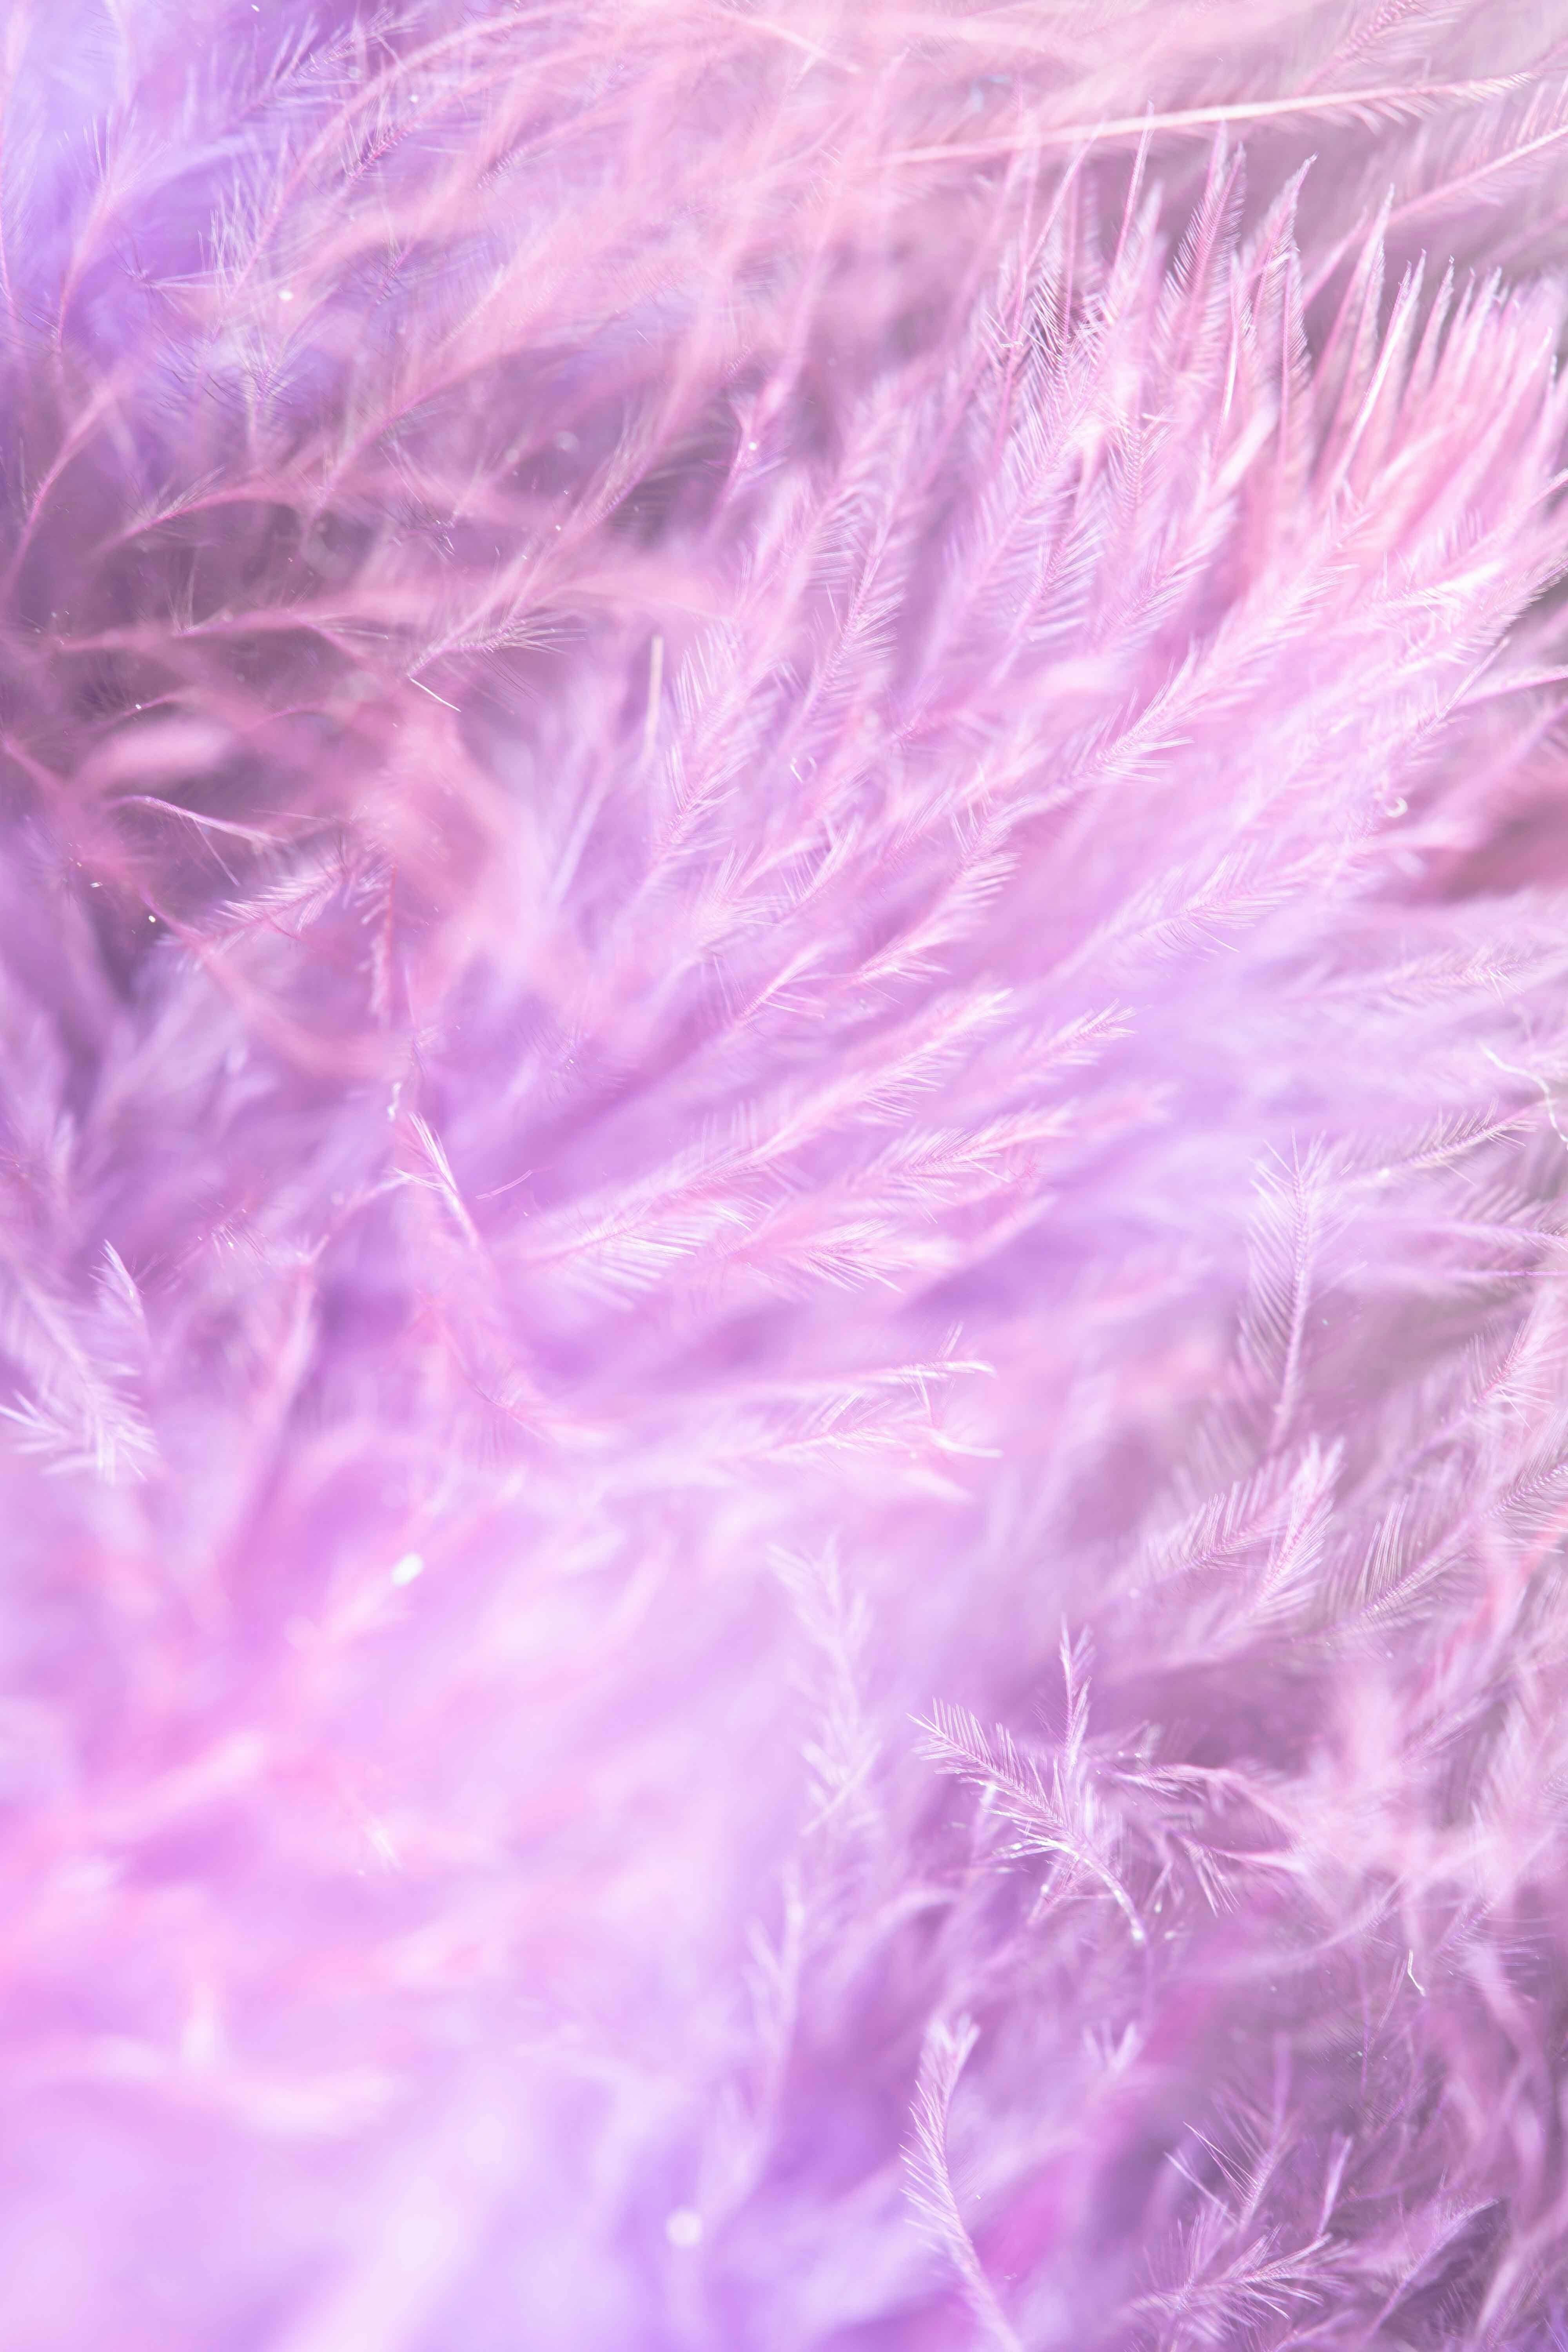 Purple Feathers in Close-up Photography · Free Stock Photo